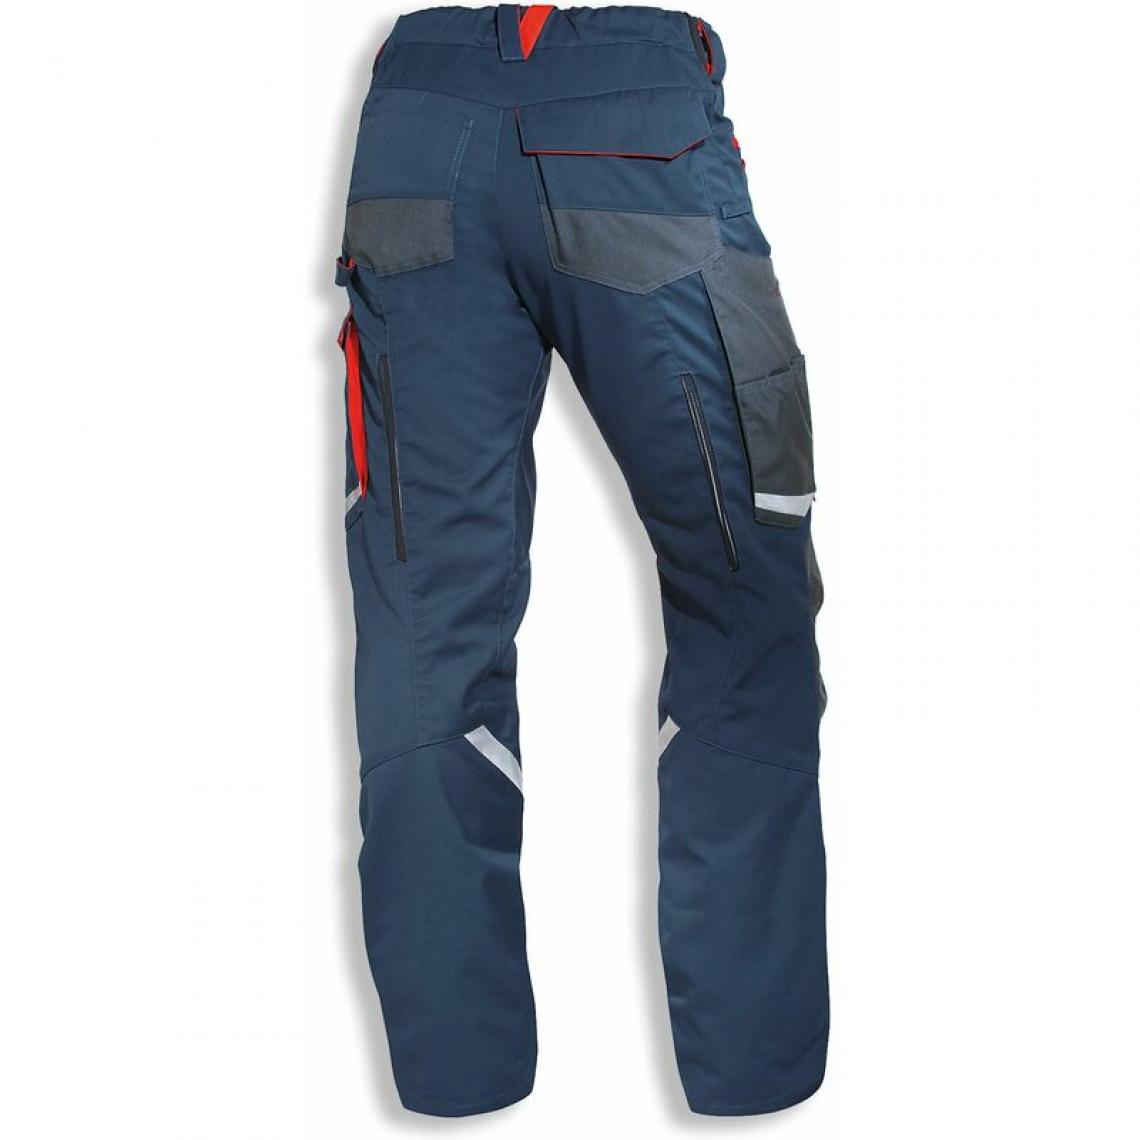 Uvex - uvex Pantalon cargo regular fit suXXeed, bleu nuit,taille 48 () - Protections corps